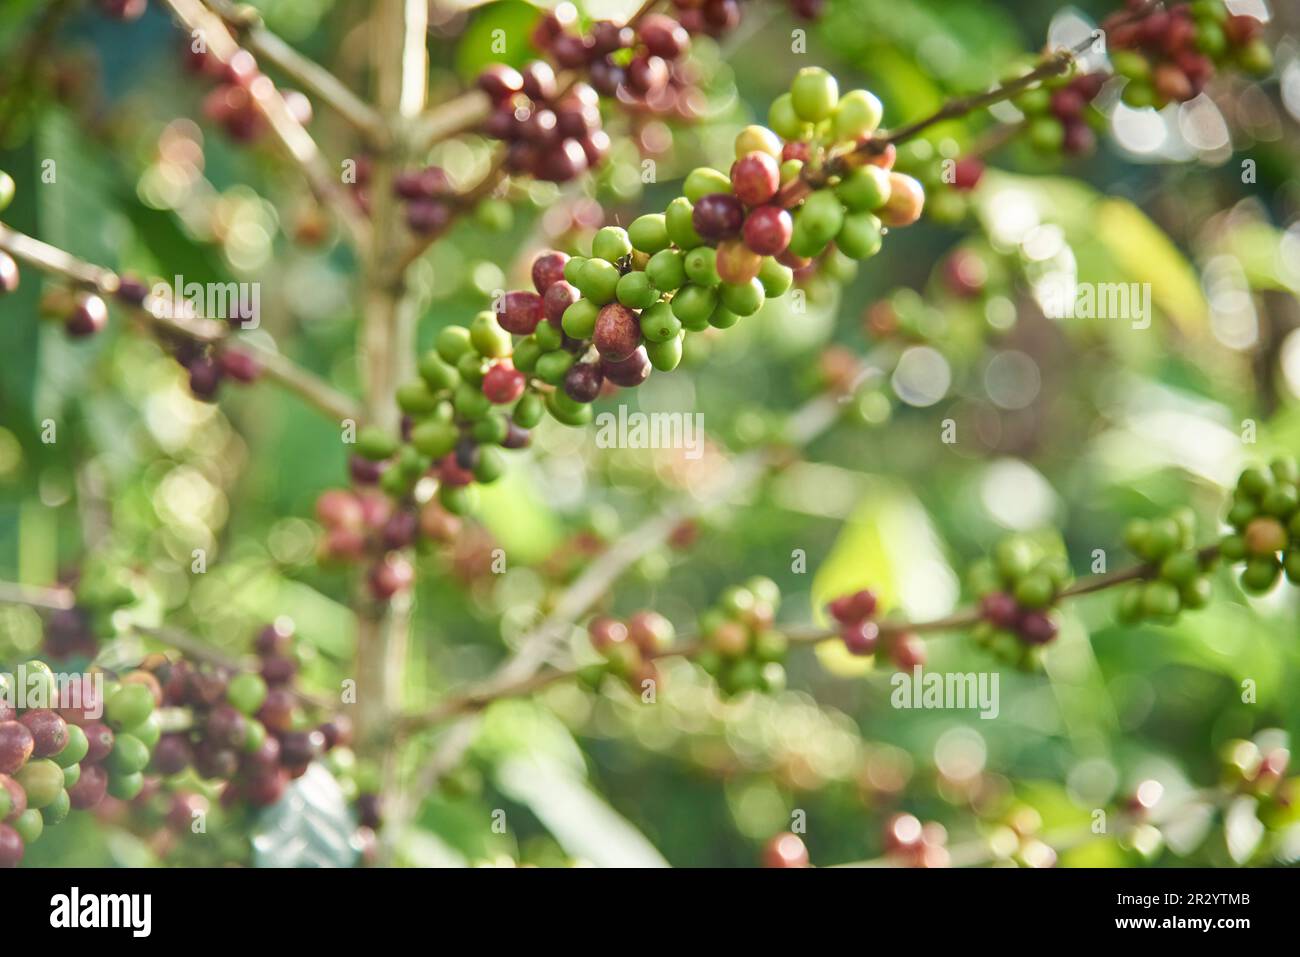 Coffee tree with many coffee beans, ripe and unripe, in its branches, in Santander, Colombia. Colombian traditional production. Stock Photo